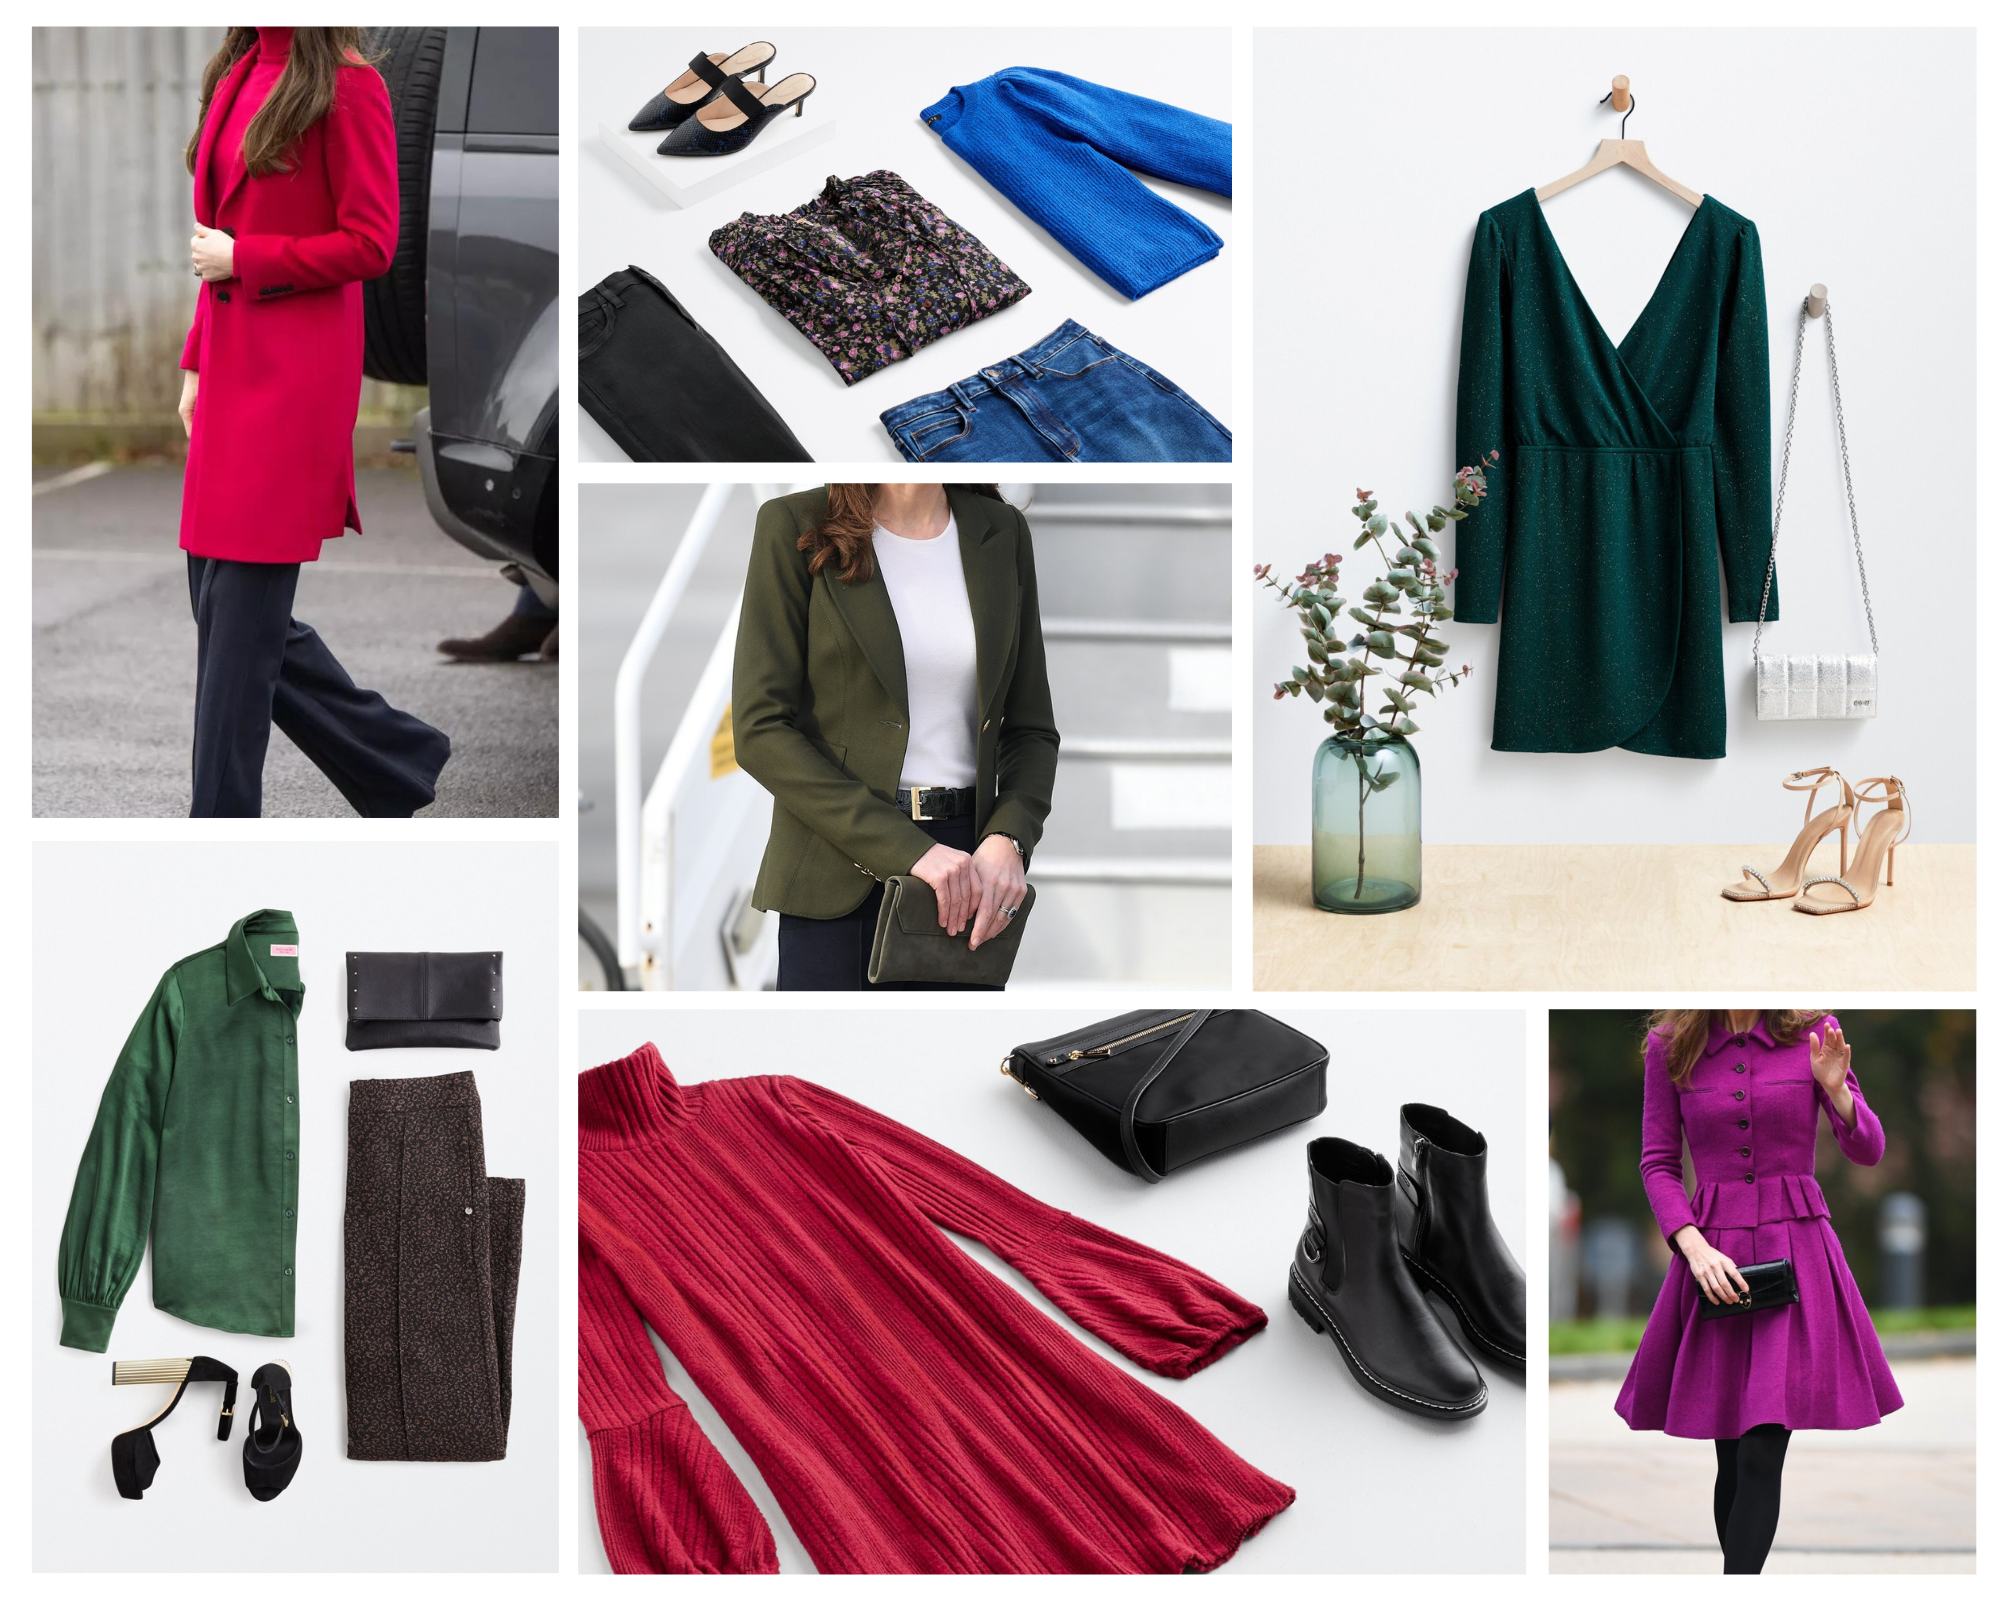 Style like royalty: Embrace the magic of jewel tones